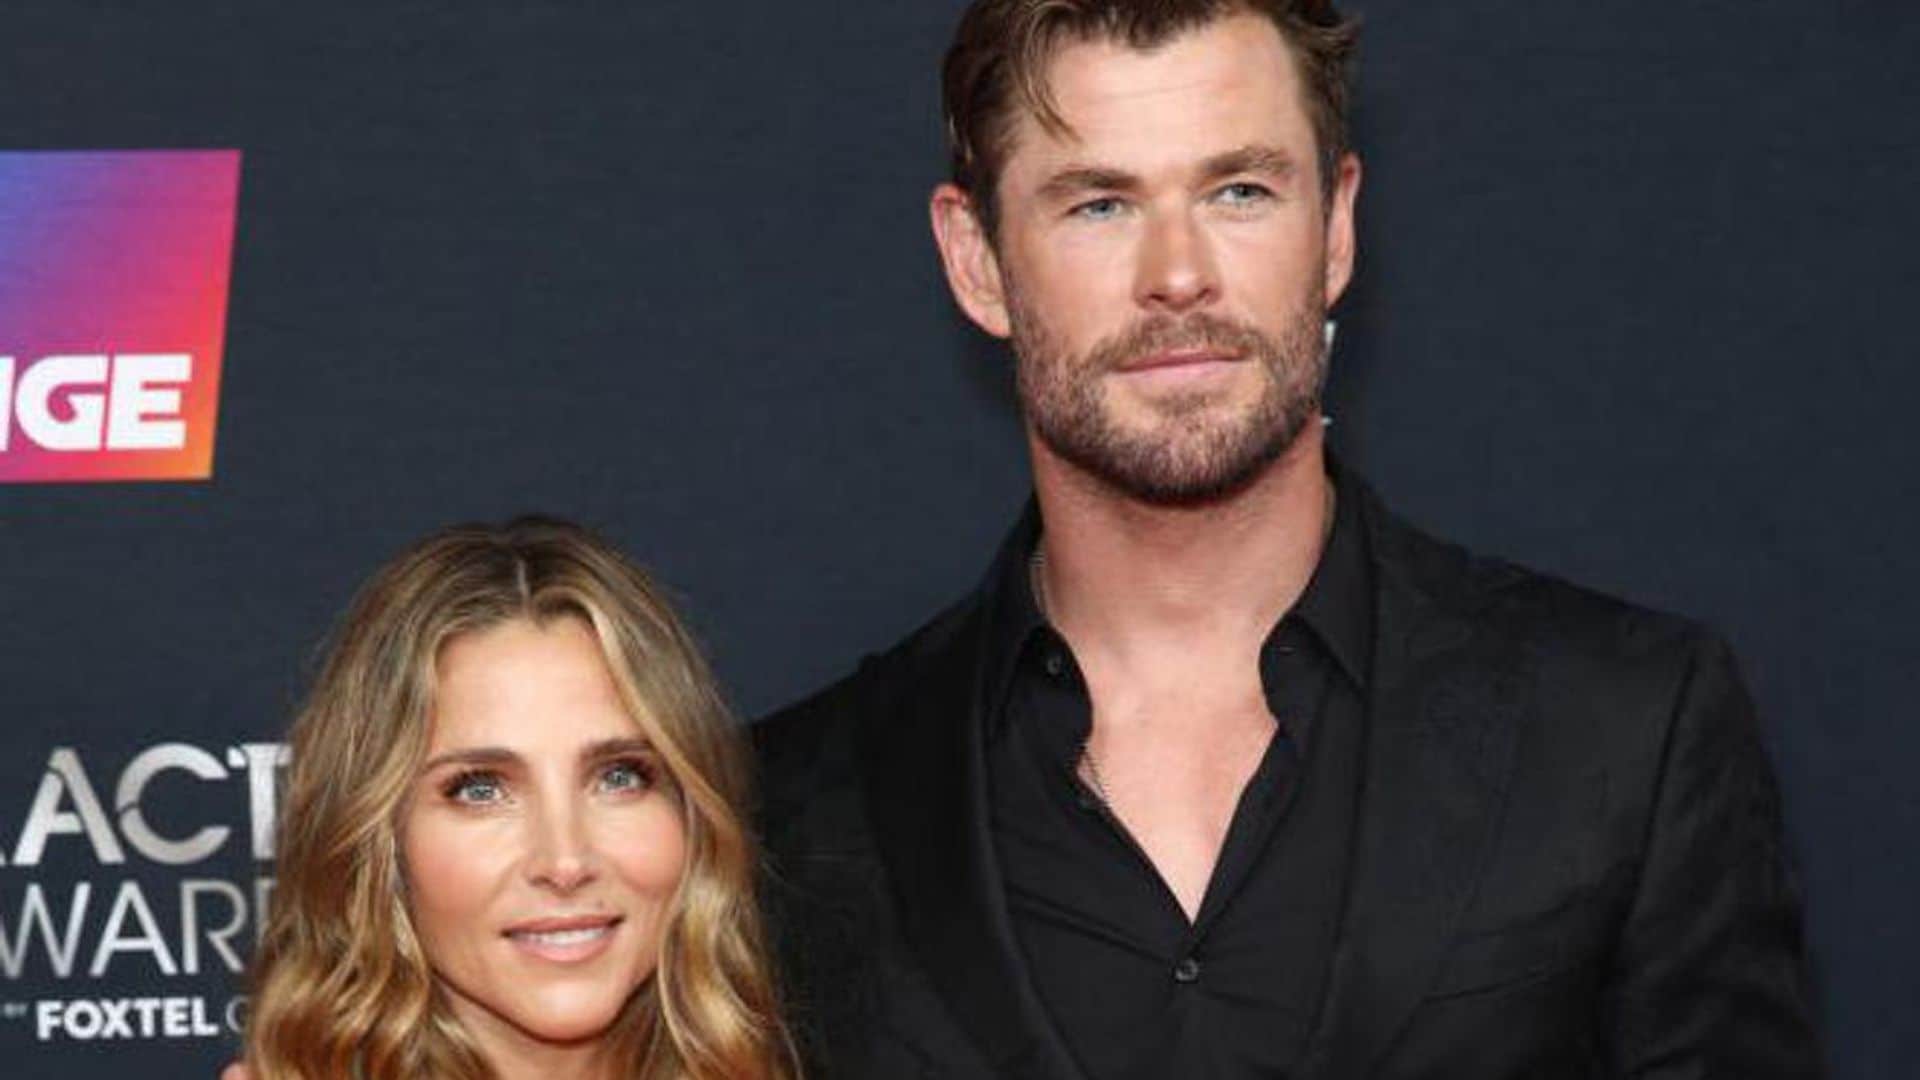 Elsa Pataky addresses ‘ups and downs’ in her marriage with Chris Hemsworth